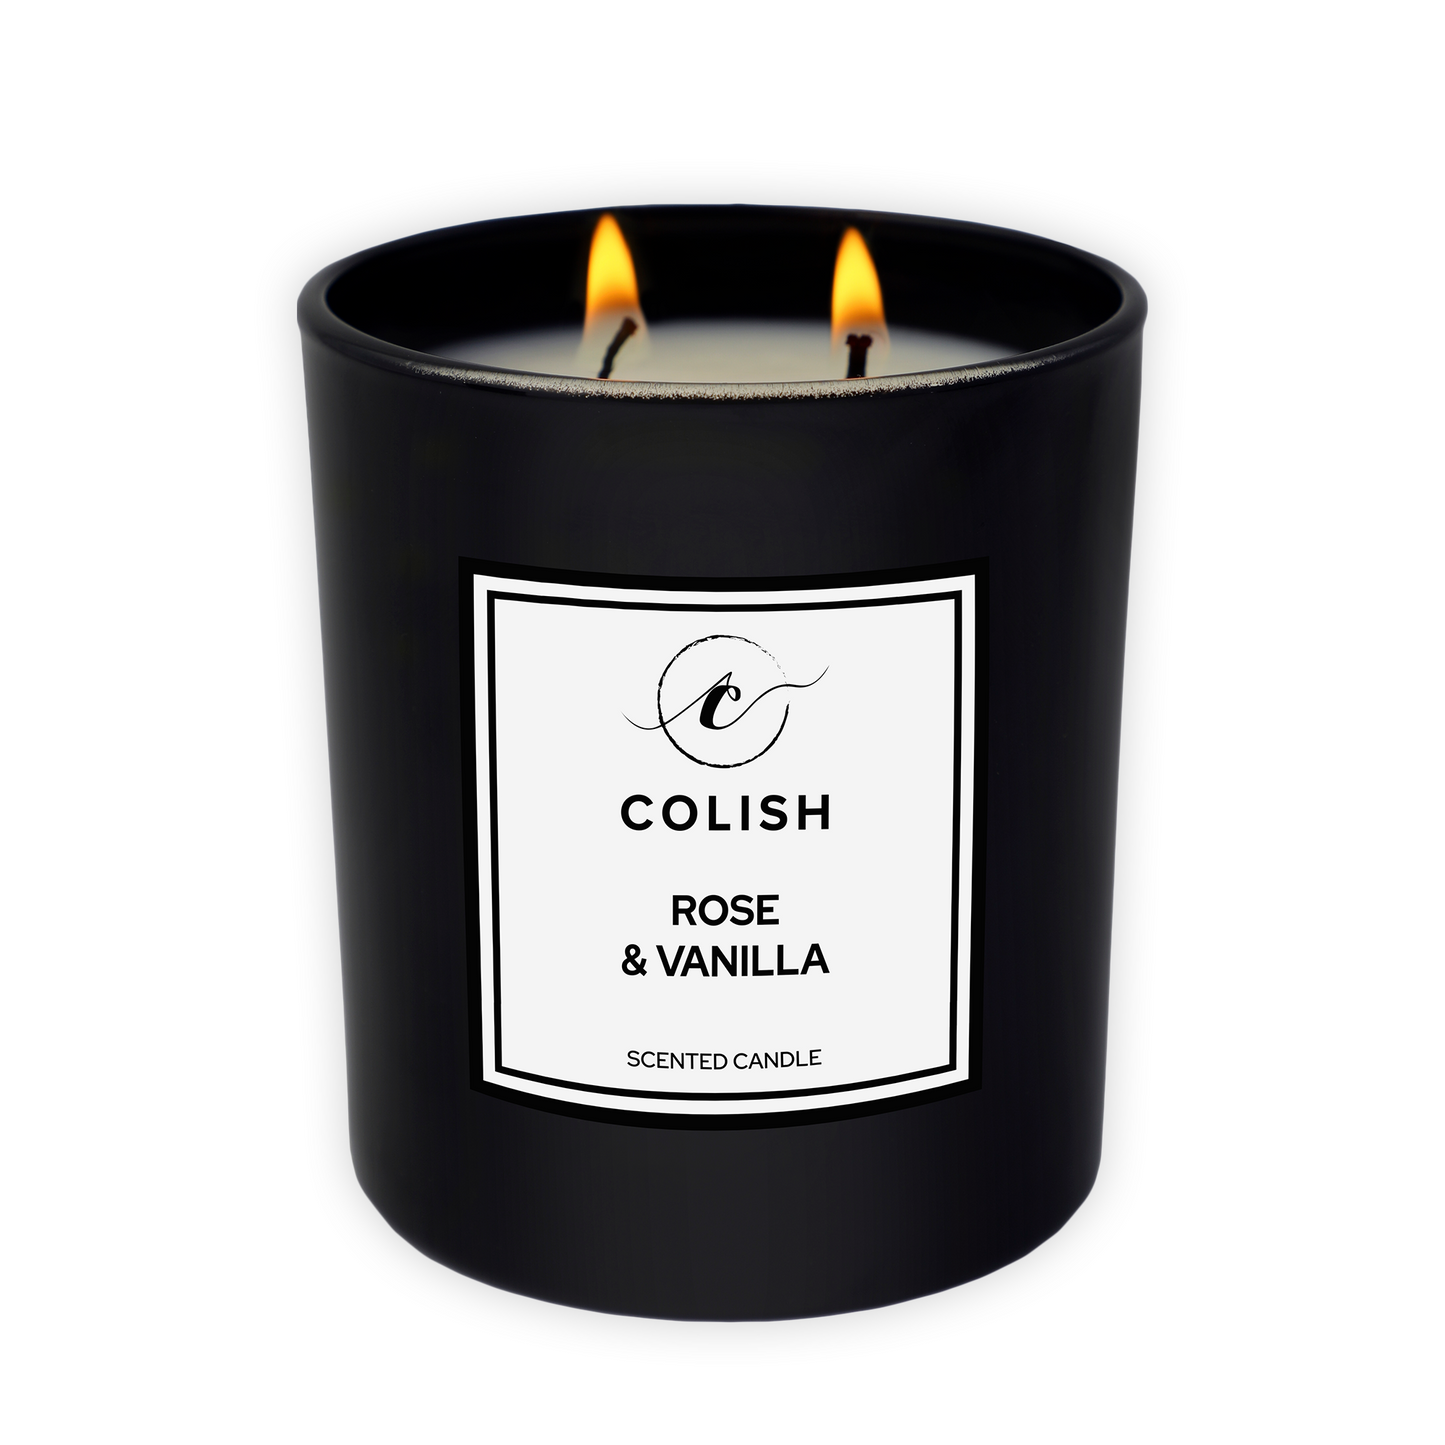 ROSE & VANILLA SCENTED CANDLE